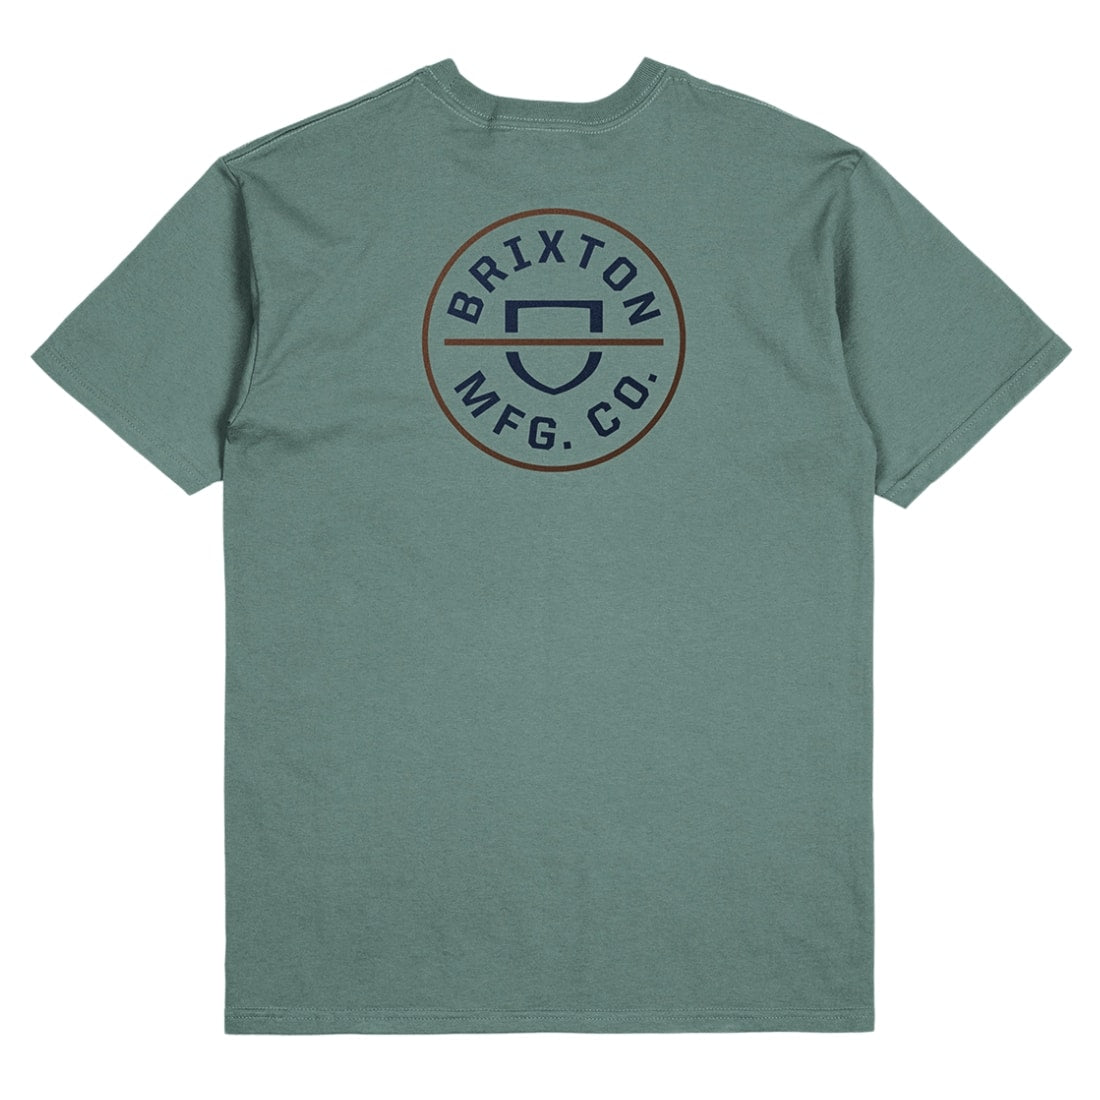 Brixton Crest II T-Shirt - Washed Navy/Chinois Green - Mens Skate Brand T-Shirt by Brixton